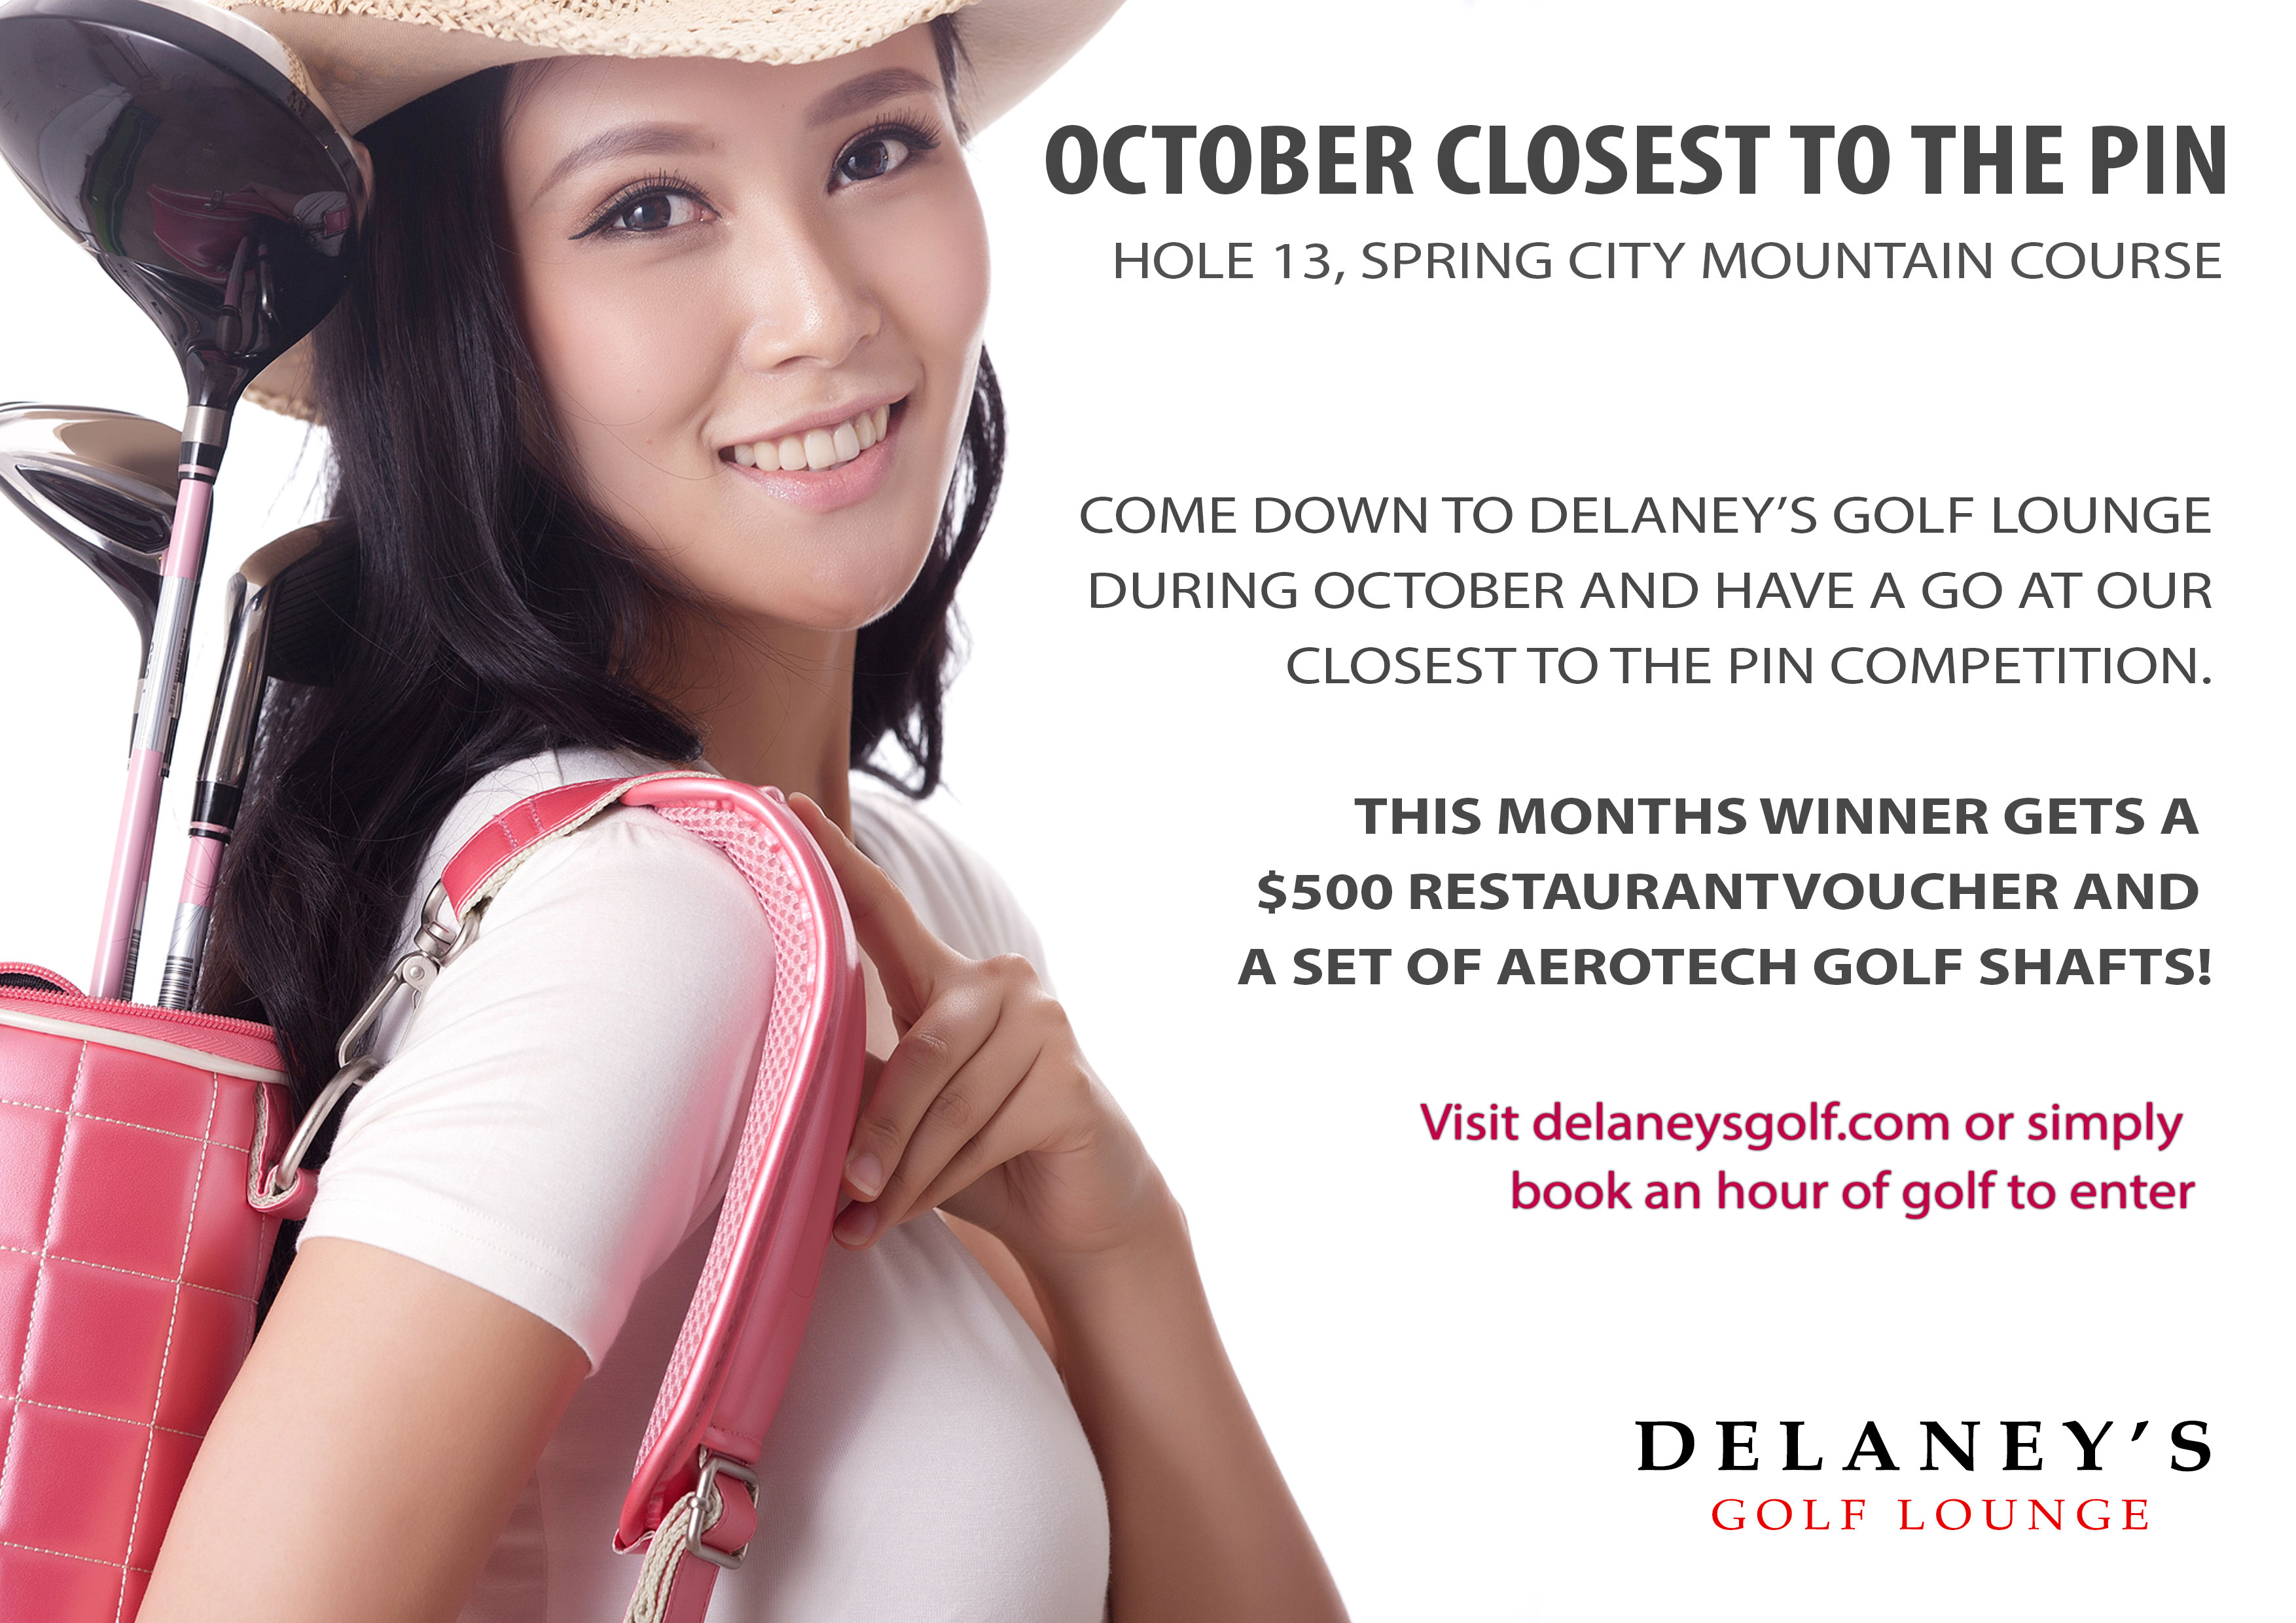 October Closest To the Pin at Delaneys Golf